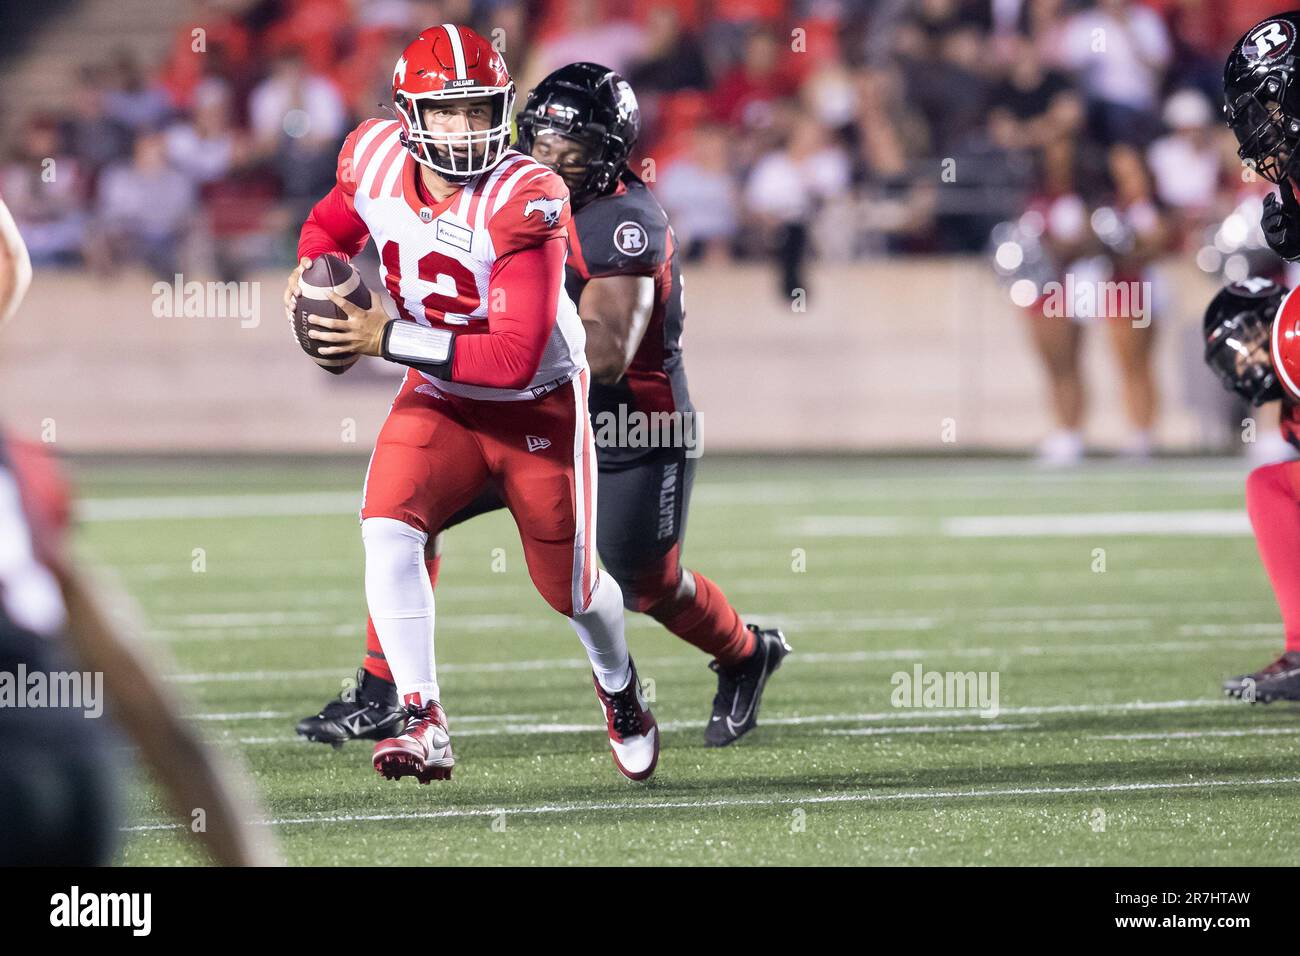 Ottawa, Canada. 15th June, 2023. Calgary Stampeders quarterback Jake Maier (12) runs while looking to pass during the CFL game between Calgary Stampeders and Ottawa Redblacks held at TD Place Stadium in Ottawa, Canada. Daniel Lea/CSM/Alamy Live News Stock Photo